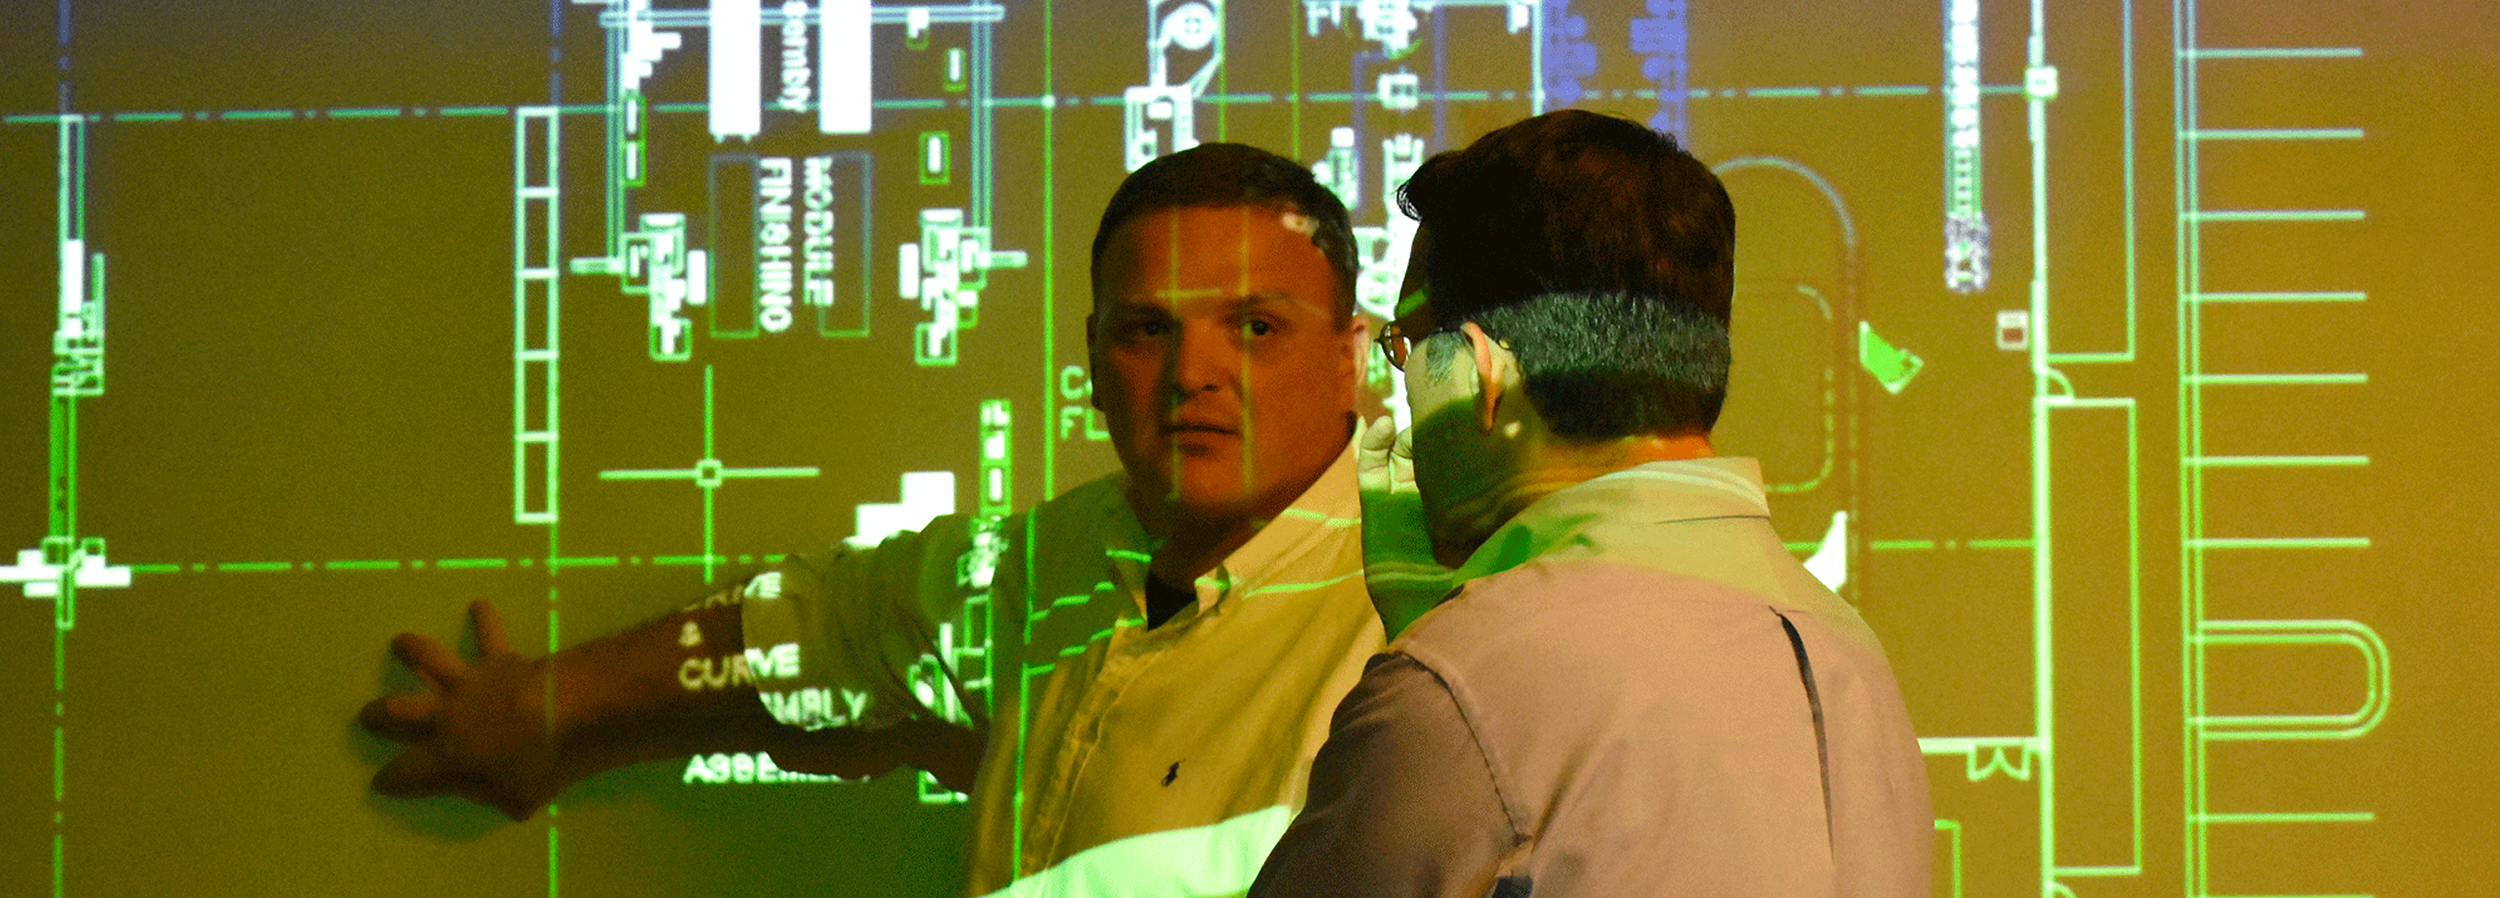 Artistic banner image of two researchers in front of a projector